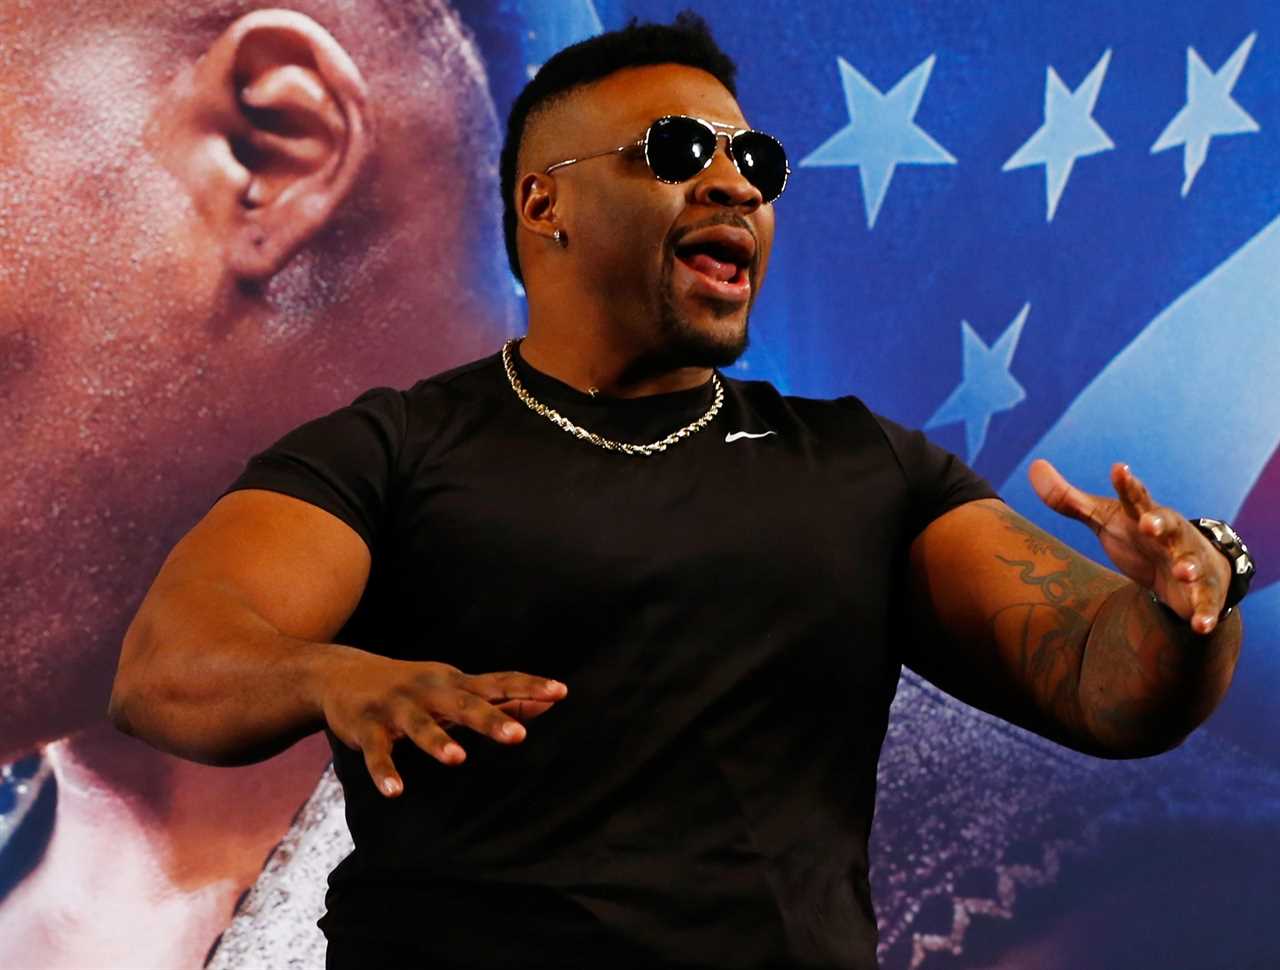 Shamed Jarrell Miller's opponent CONFIRMED this week after a ban on drugs and a bout in Argentina